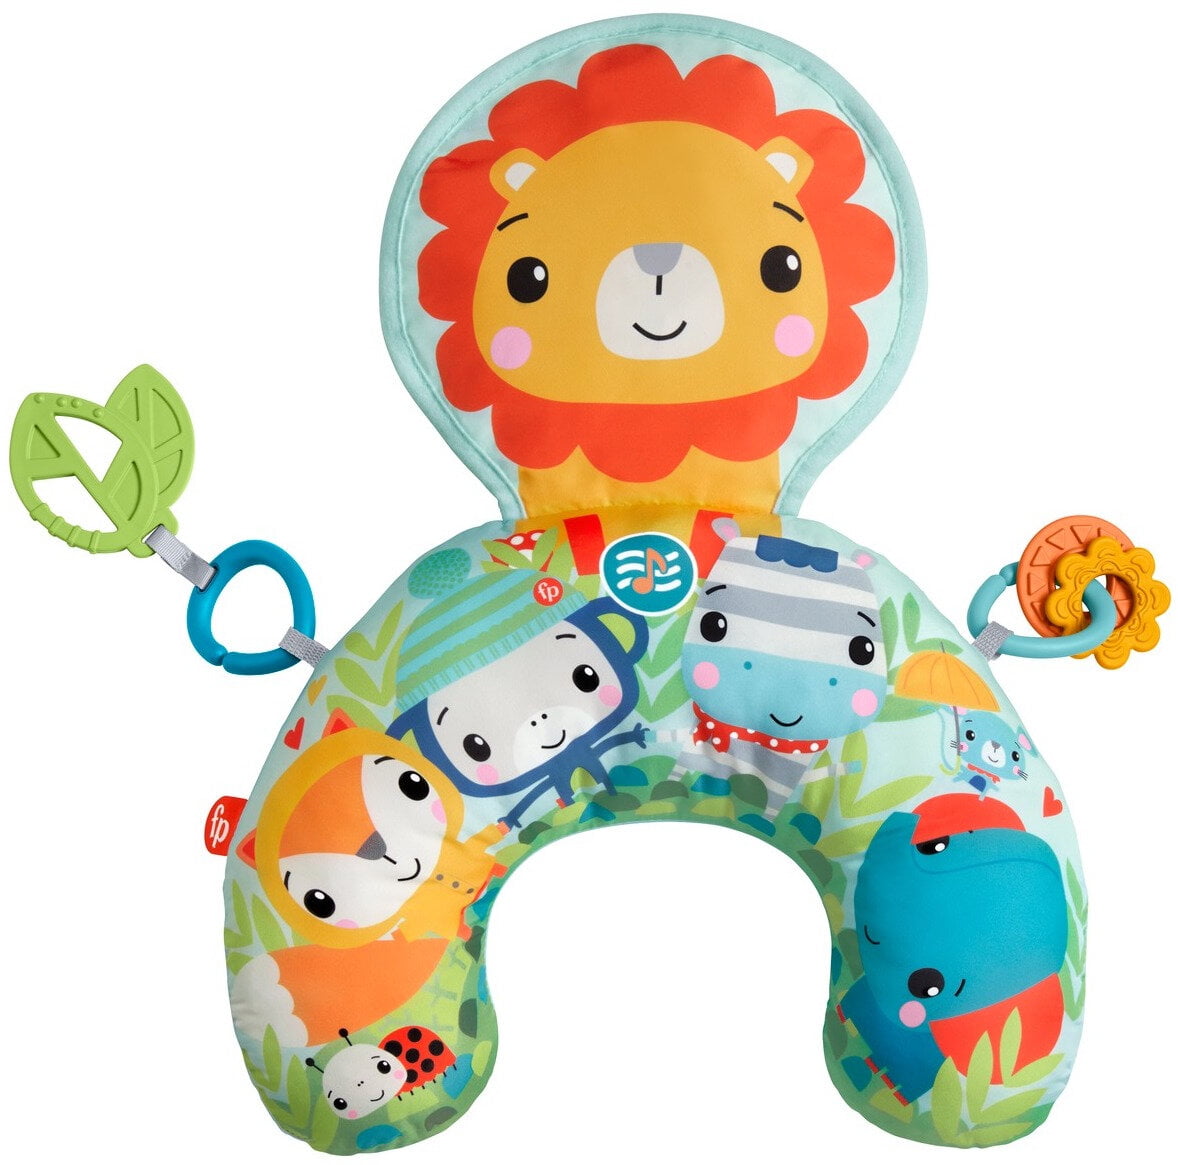 Soft Tummy Time Cushion Activity Centre with Mirror Suitable from Birth Fisher-Price Tummy Wedge Teether and Clacker